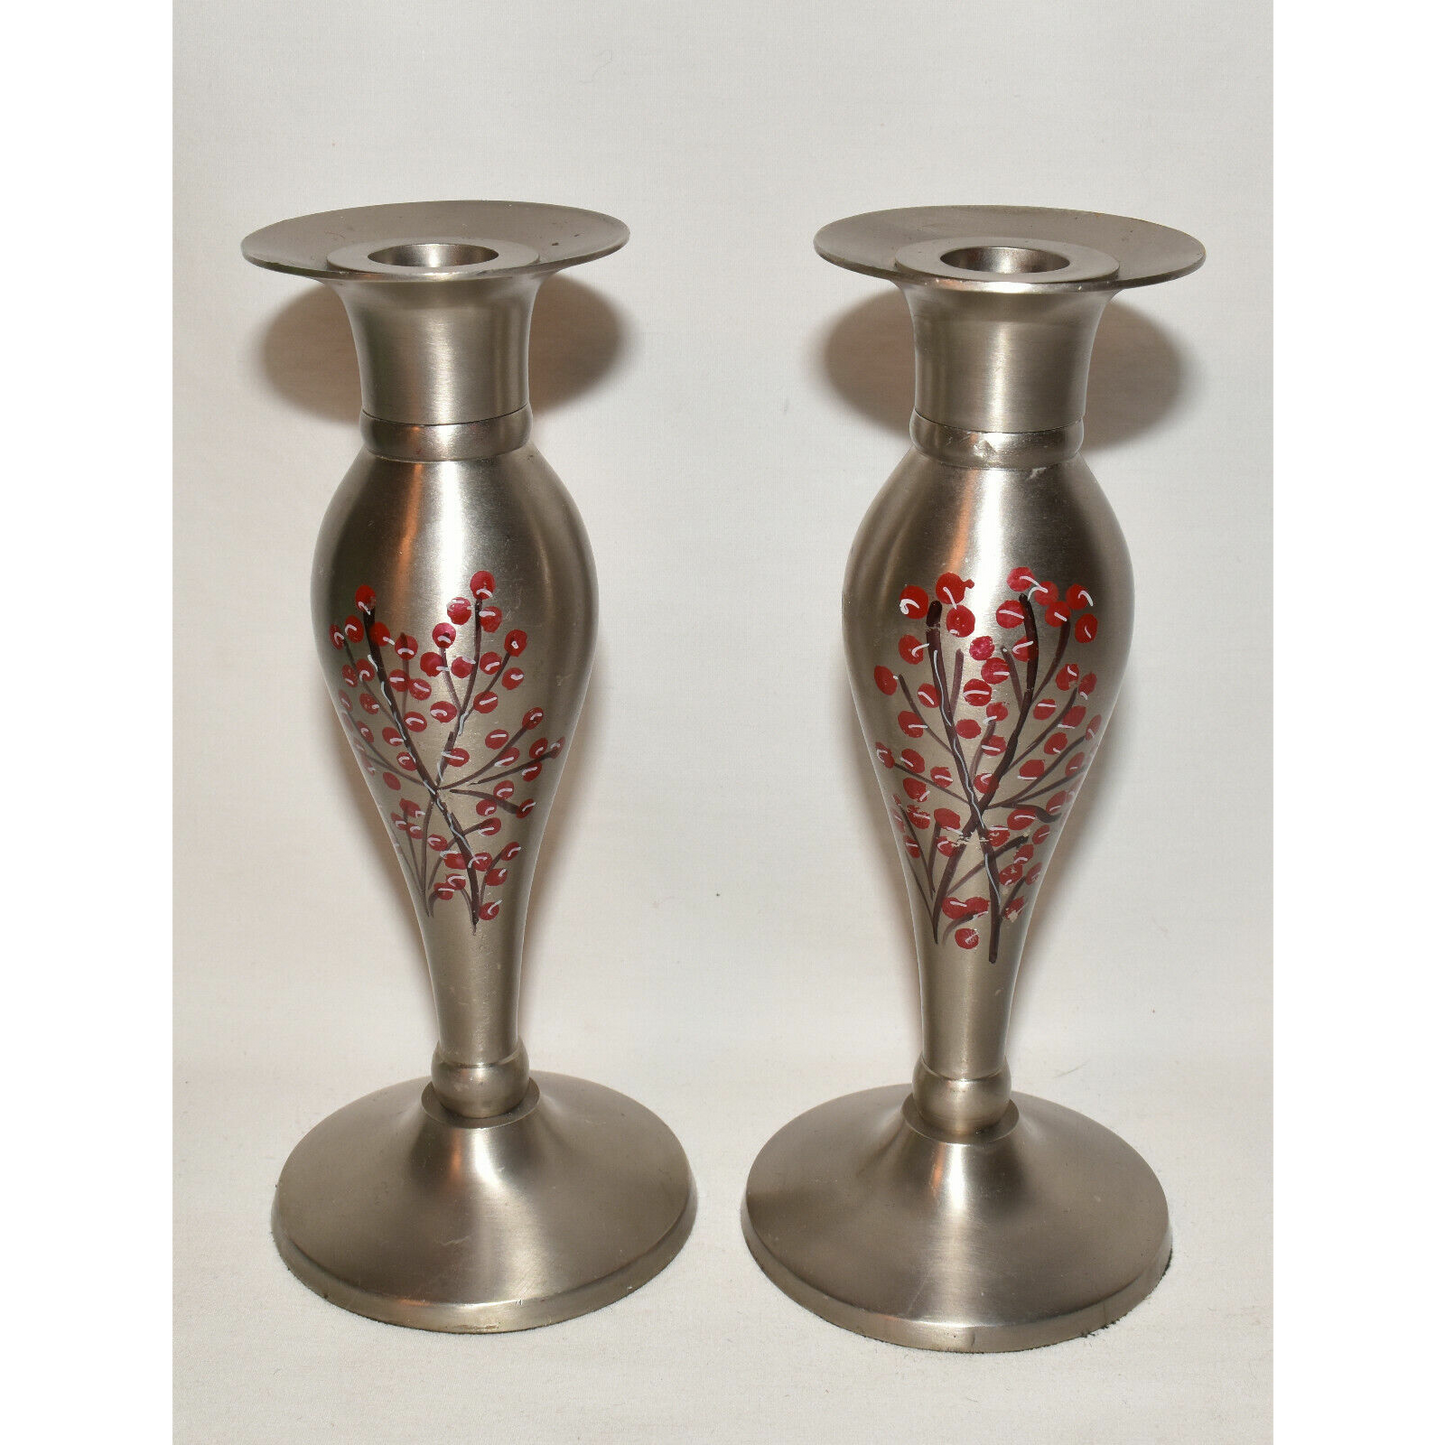 Vintage Asian Candlesticks Metal & Enamel Taper Candle Holders Hand Painted Mint